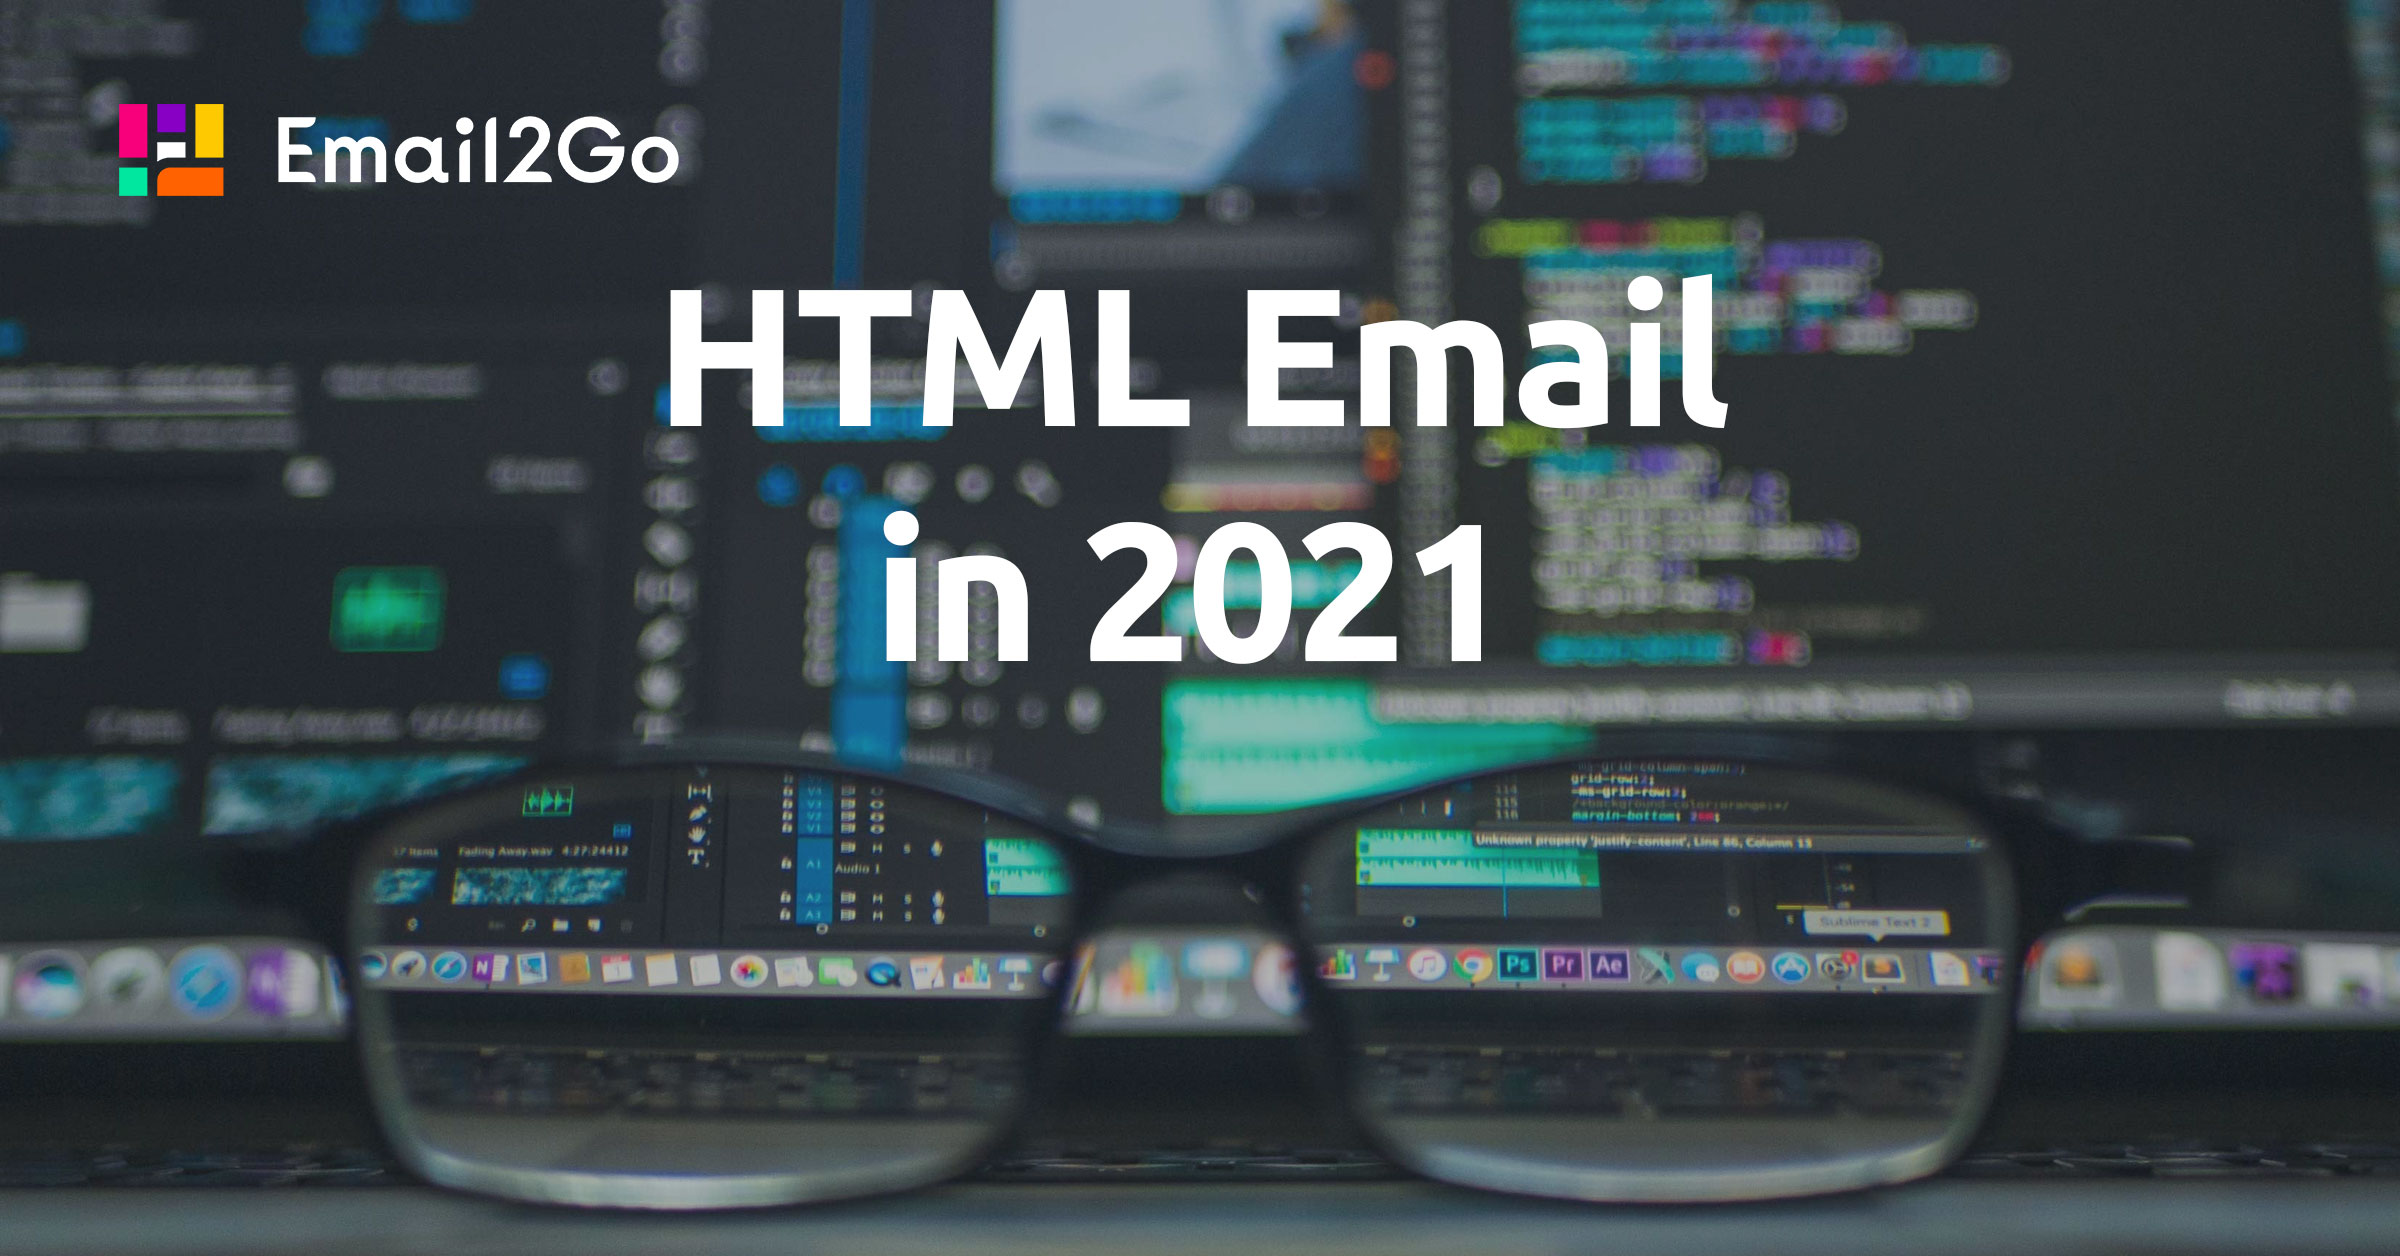 How to Build HTML Email in 2021